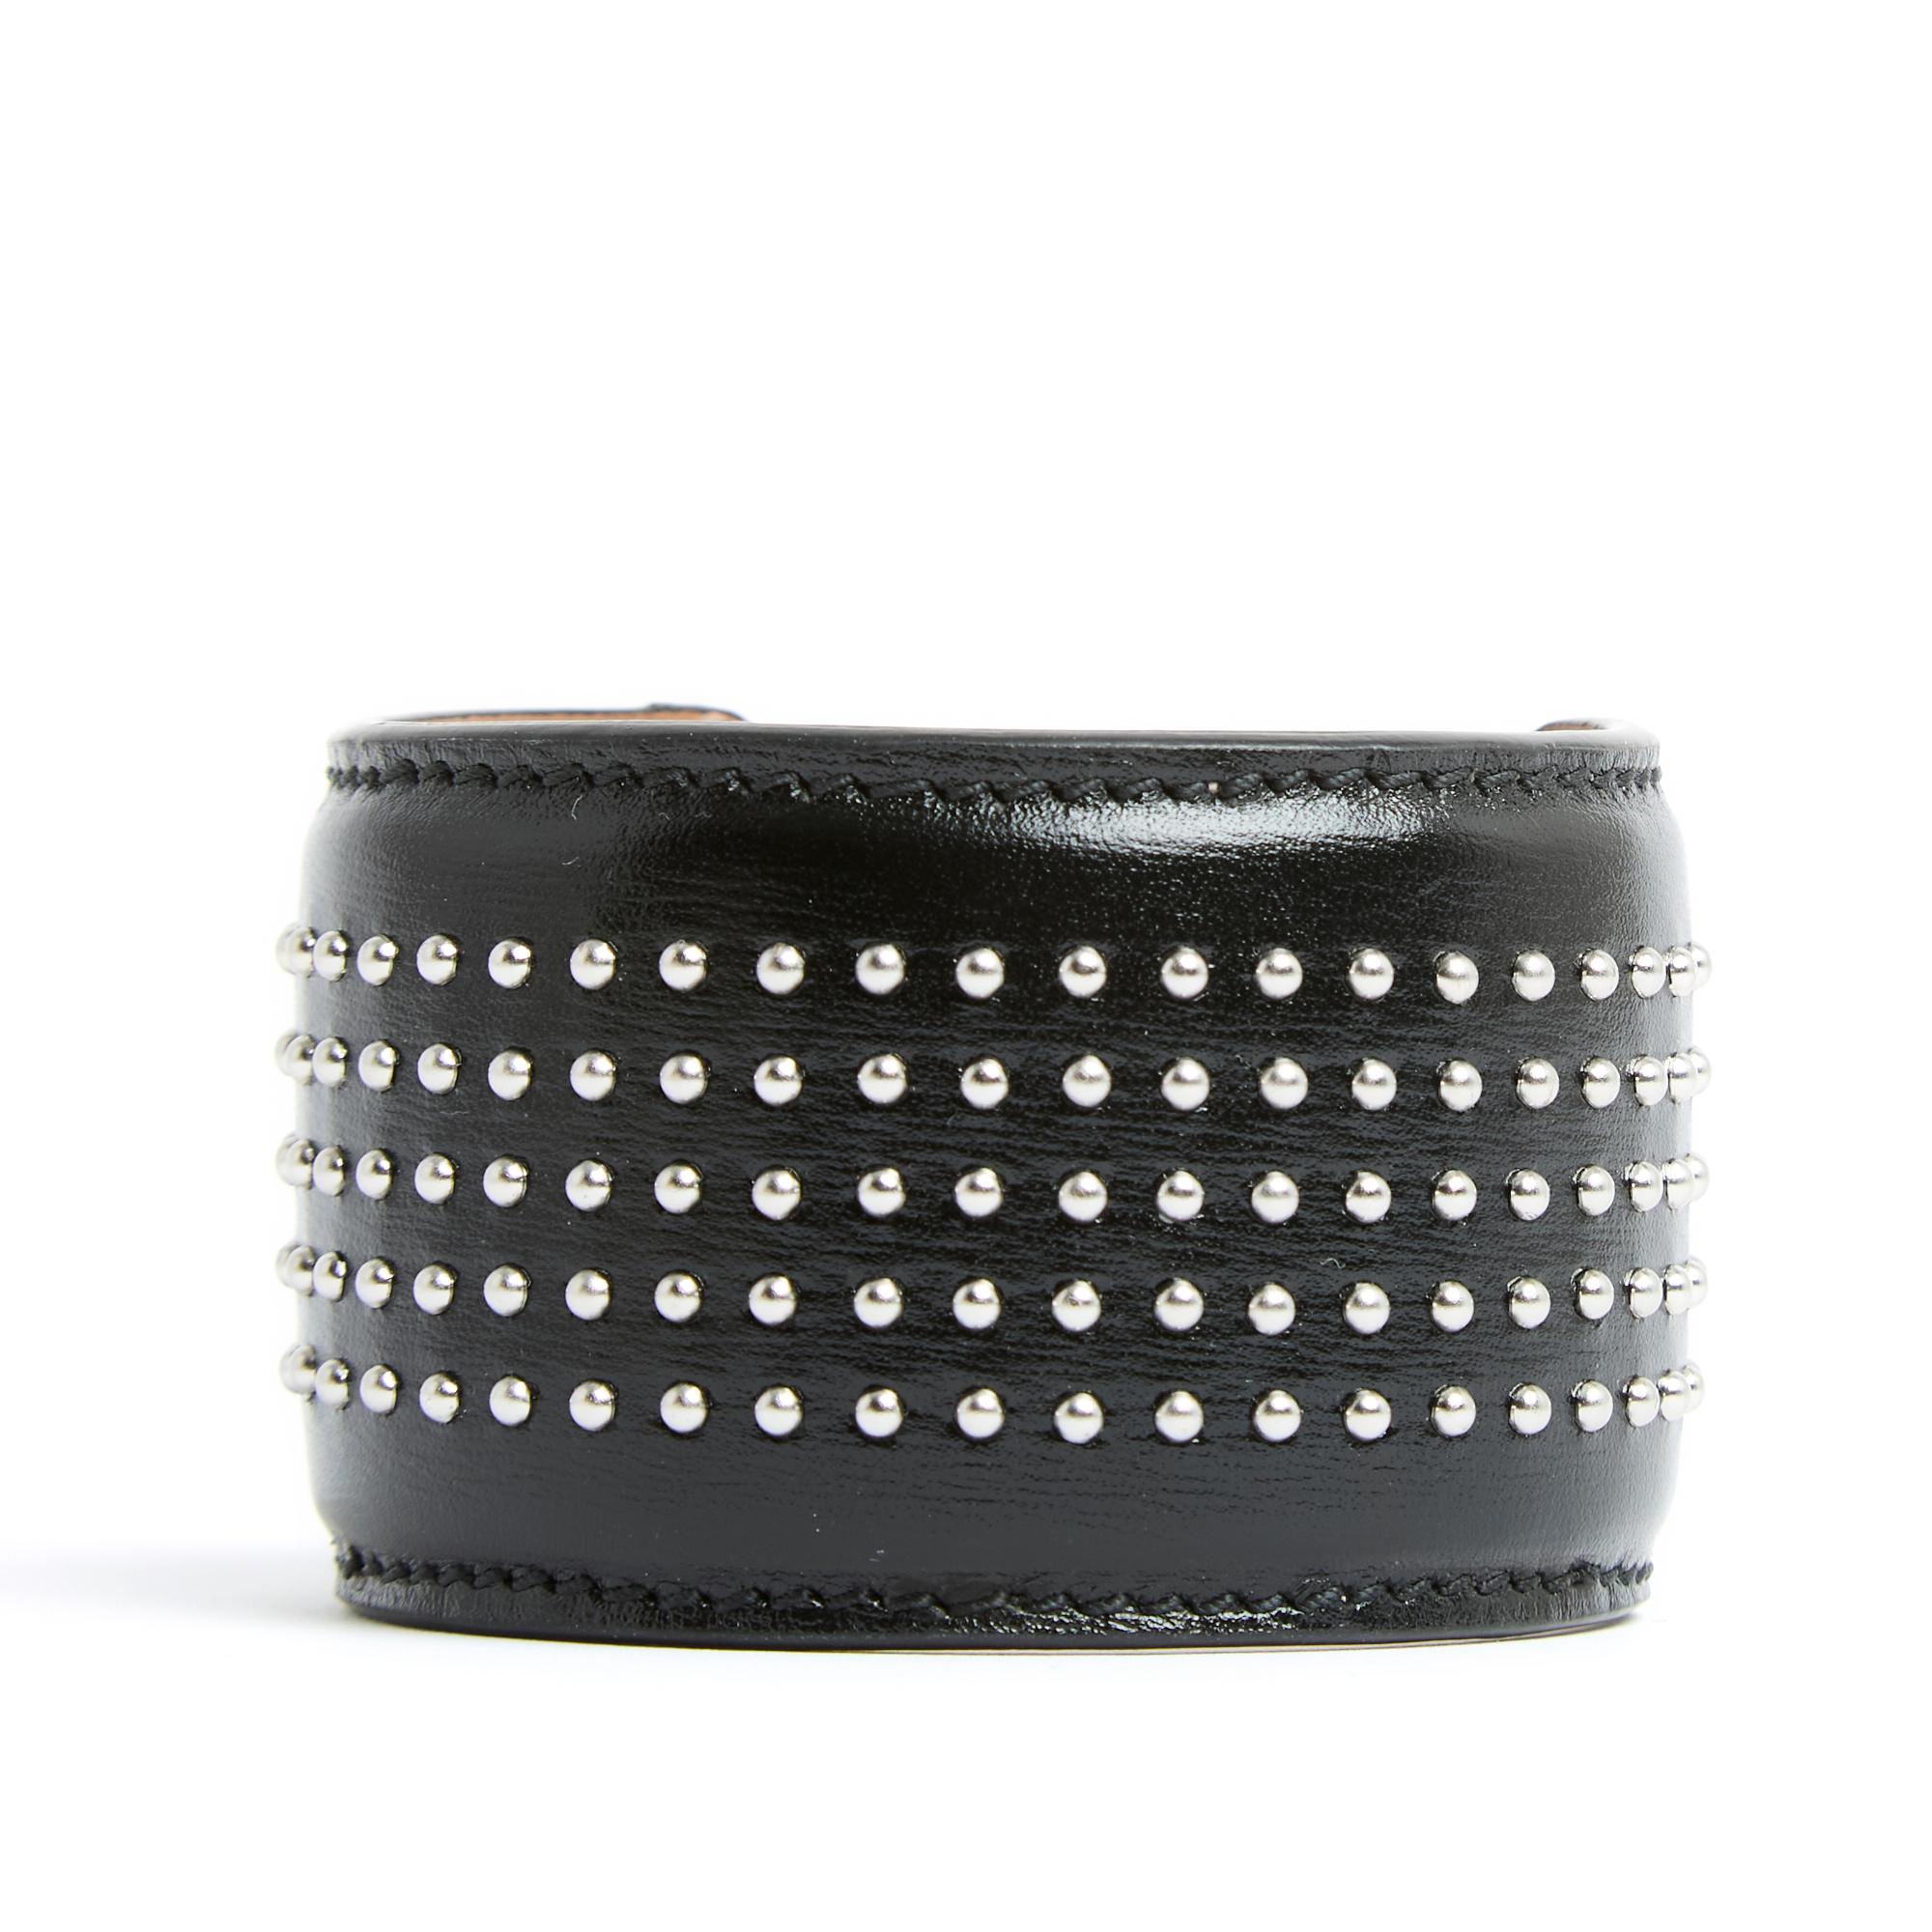 Alaïa open cuff bracelet in smooth black leather decorated with silver metal micro studs, interior of the bracelet lined with black leather. Width of the bracelet seen from above 4 cm, length of the bracelet 14 cm excluding opening for wrist from